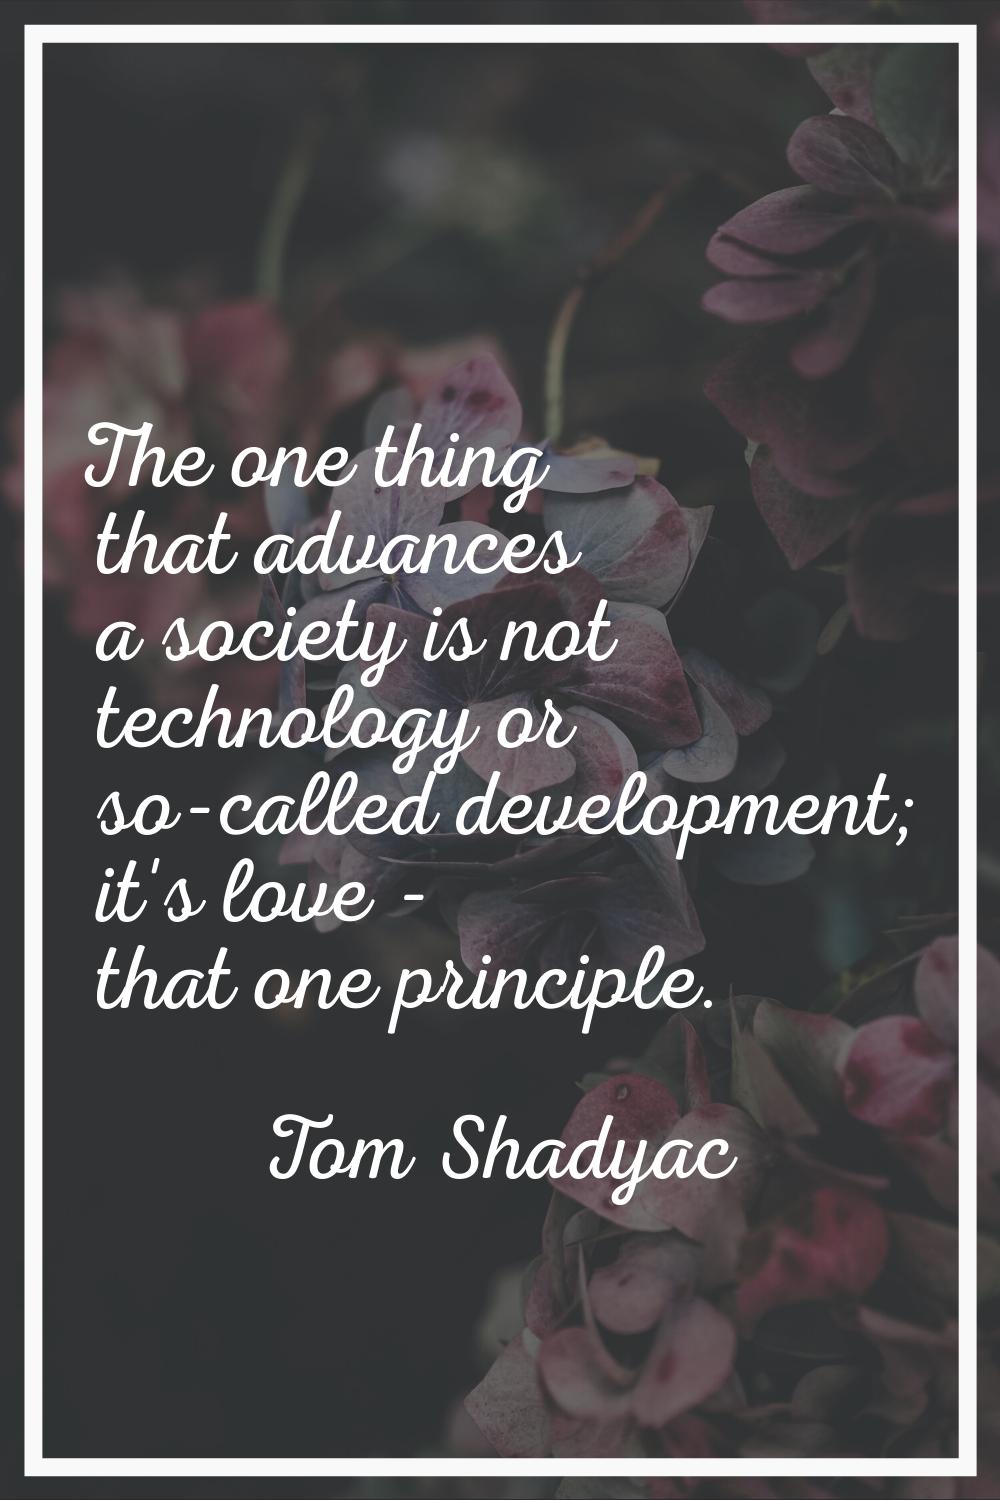 The one thing that advances a society is not technology or so-called development; it's love - that 